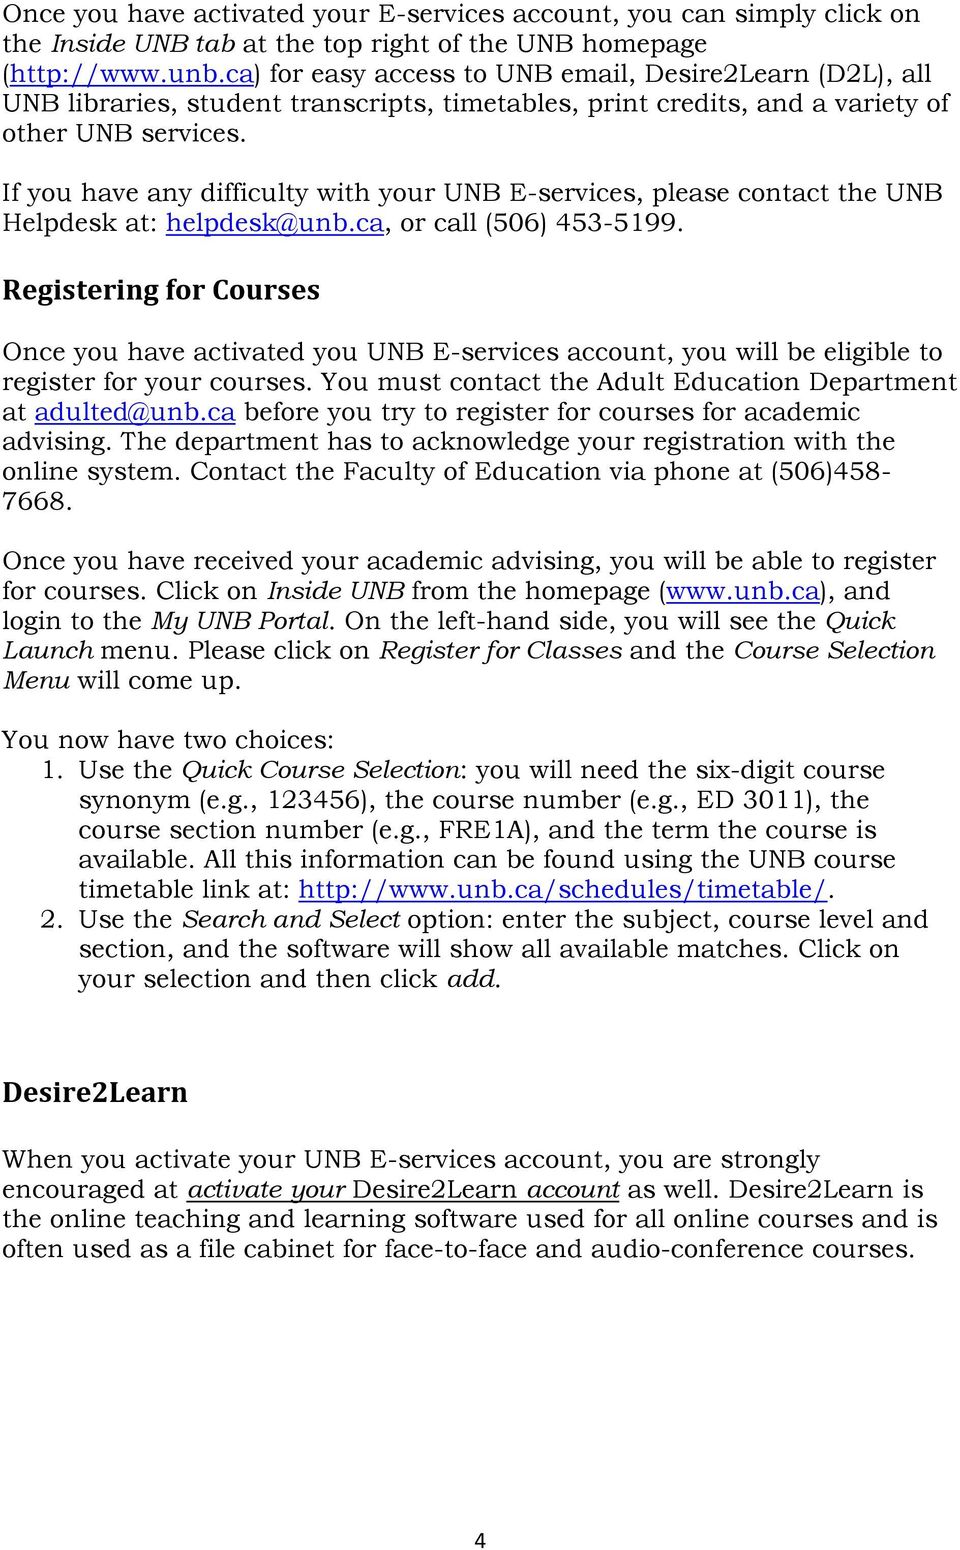 If you have any difficulty with your UNB E-services, please contact the UNB Helpdesk at: helpdesk@unb.ca, or call (506) 453-5199.